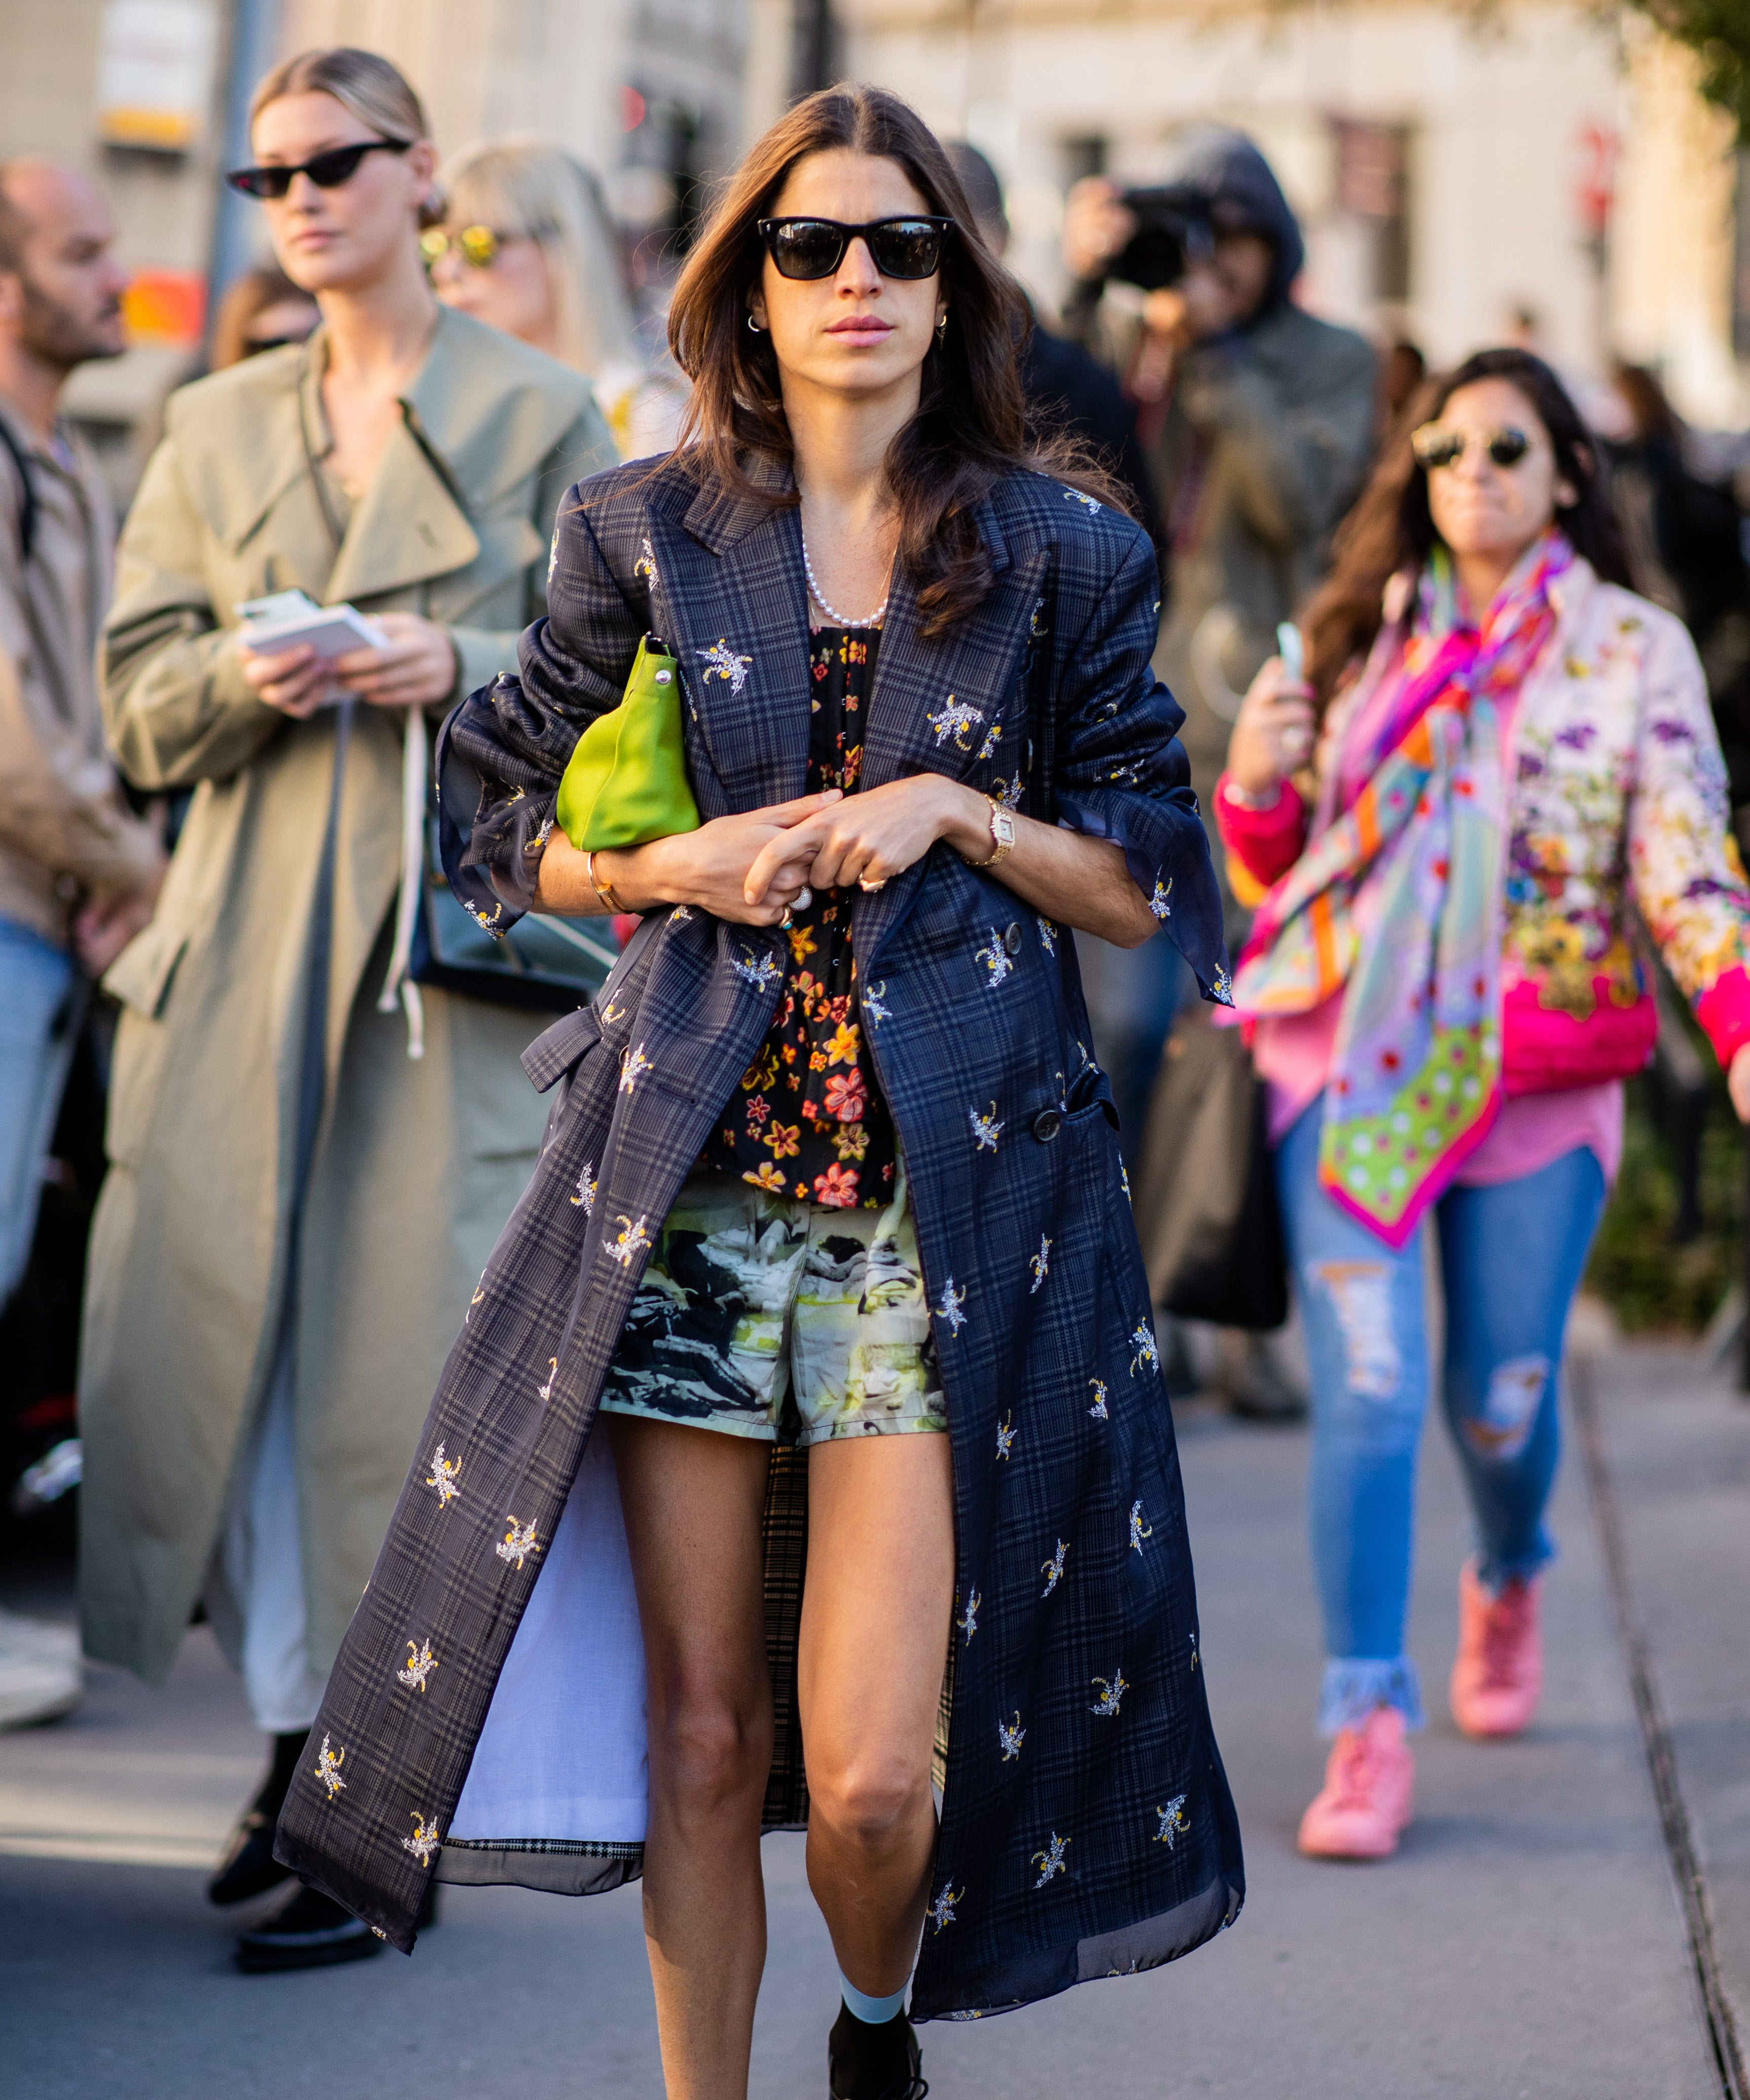 When The Arm Party Is Over: Inside The Rise & Fall Of The Man Repeller ...